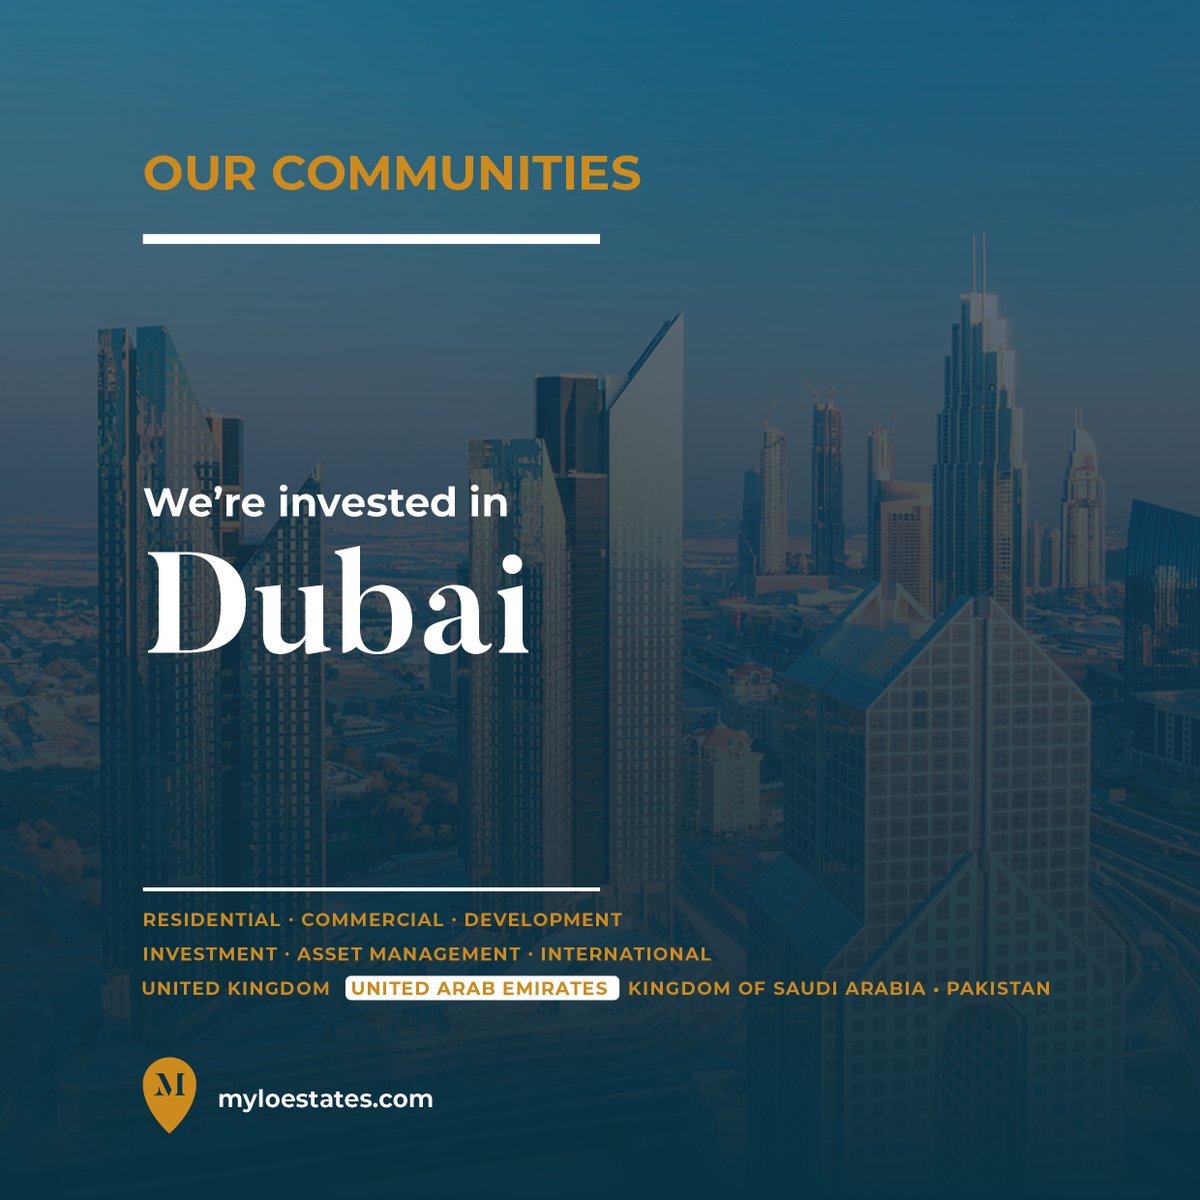 Strategically located between 'East and West', a major cosmopolitan city, Dubai is known as the #cityofinnovation and a world leader for #AI, #robotics and #fintech. 
Invest in the region's business and cultural hub.
#dubairealestate  #internationalinvestment  #wealthmanagement